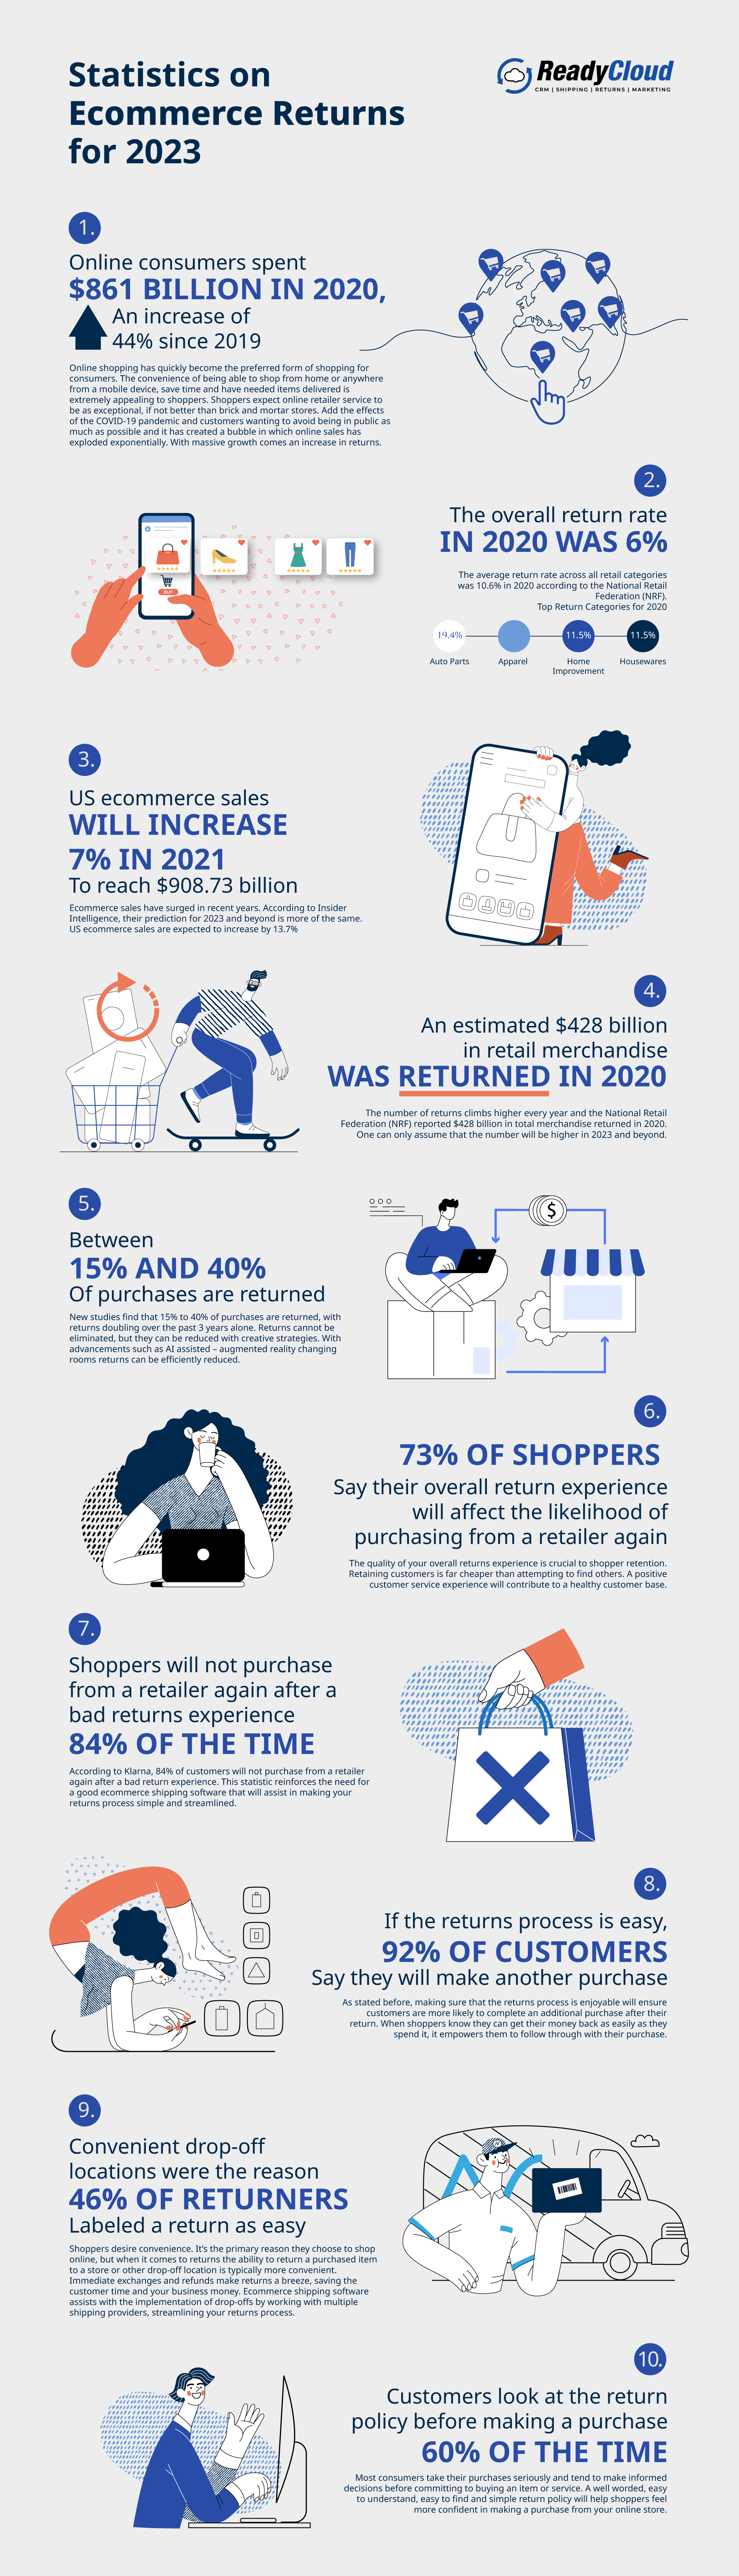 Infographic: take a look at these statistics on ecommerce returns for 2023.